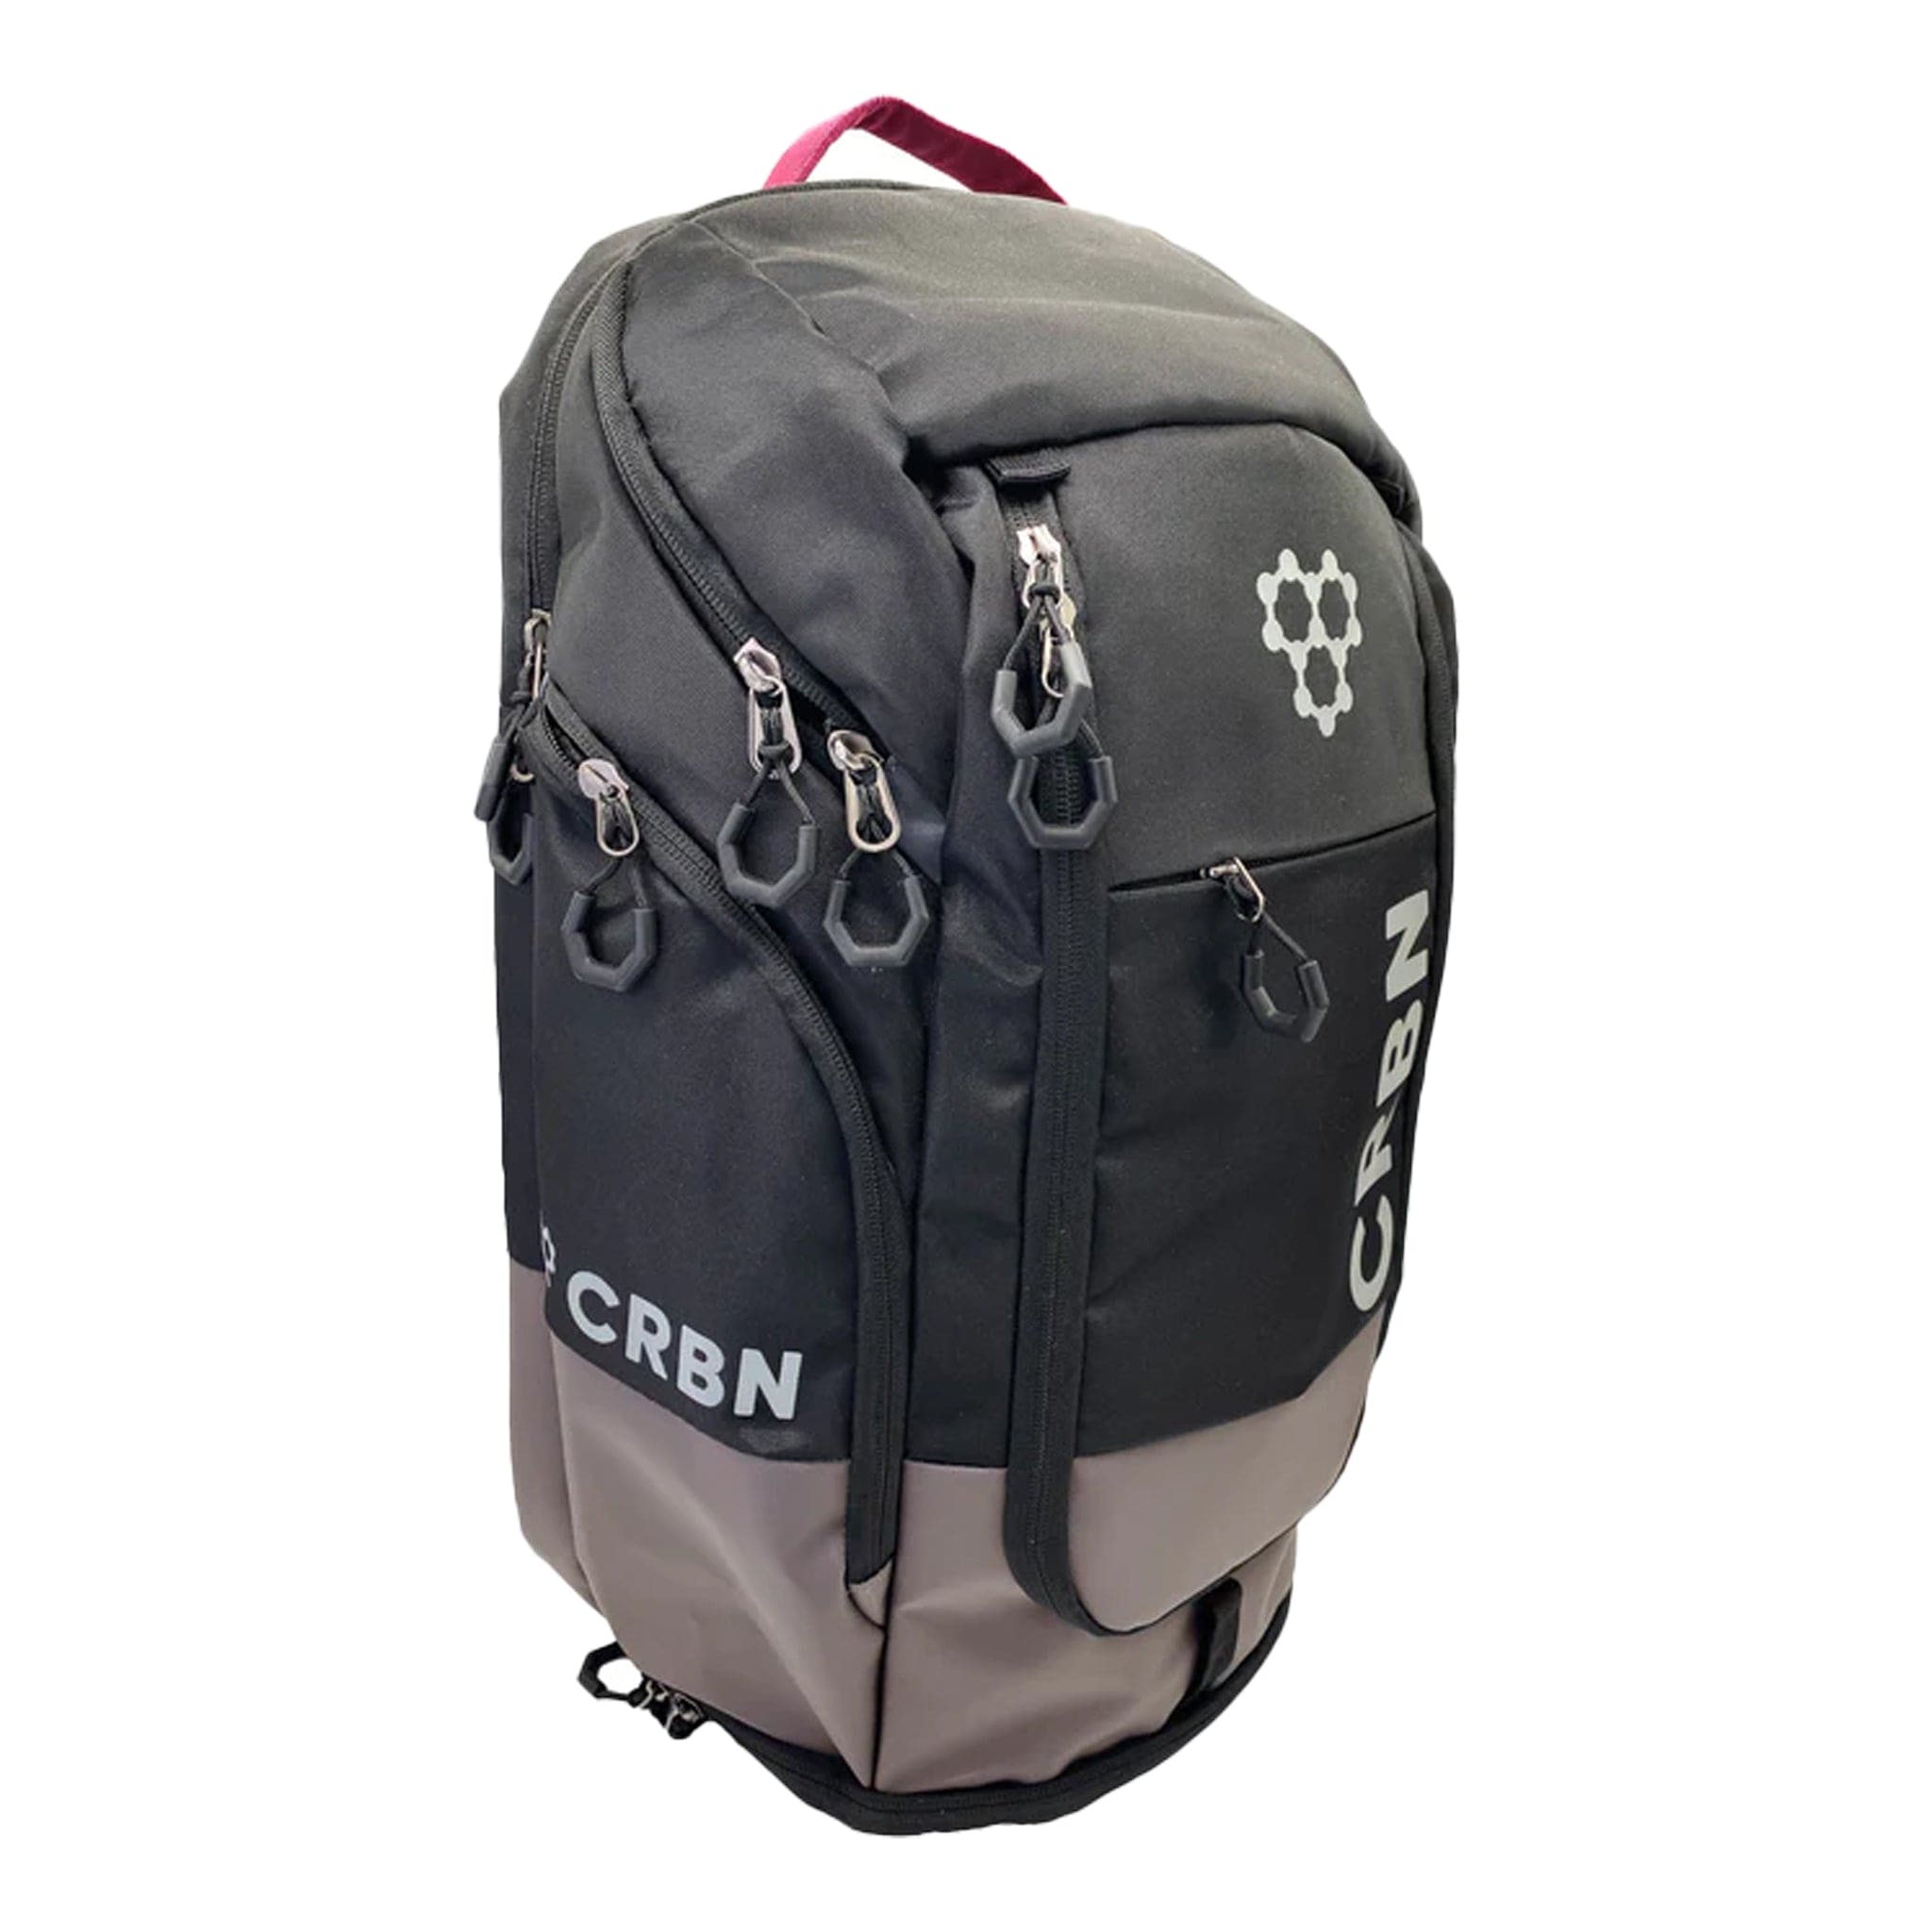 CRBN PRO TEAM BACKPACK